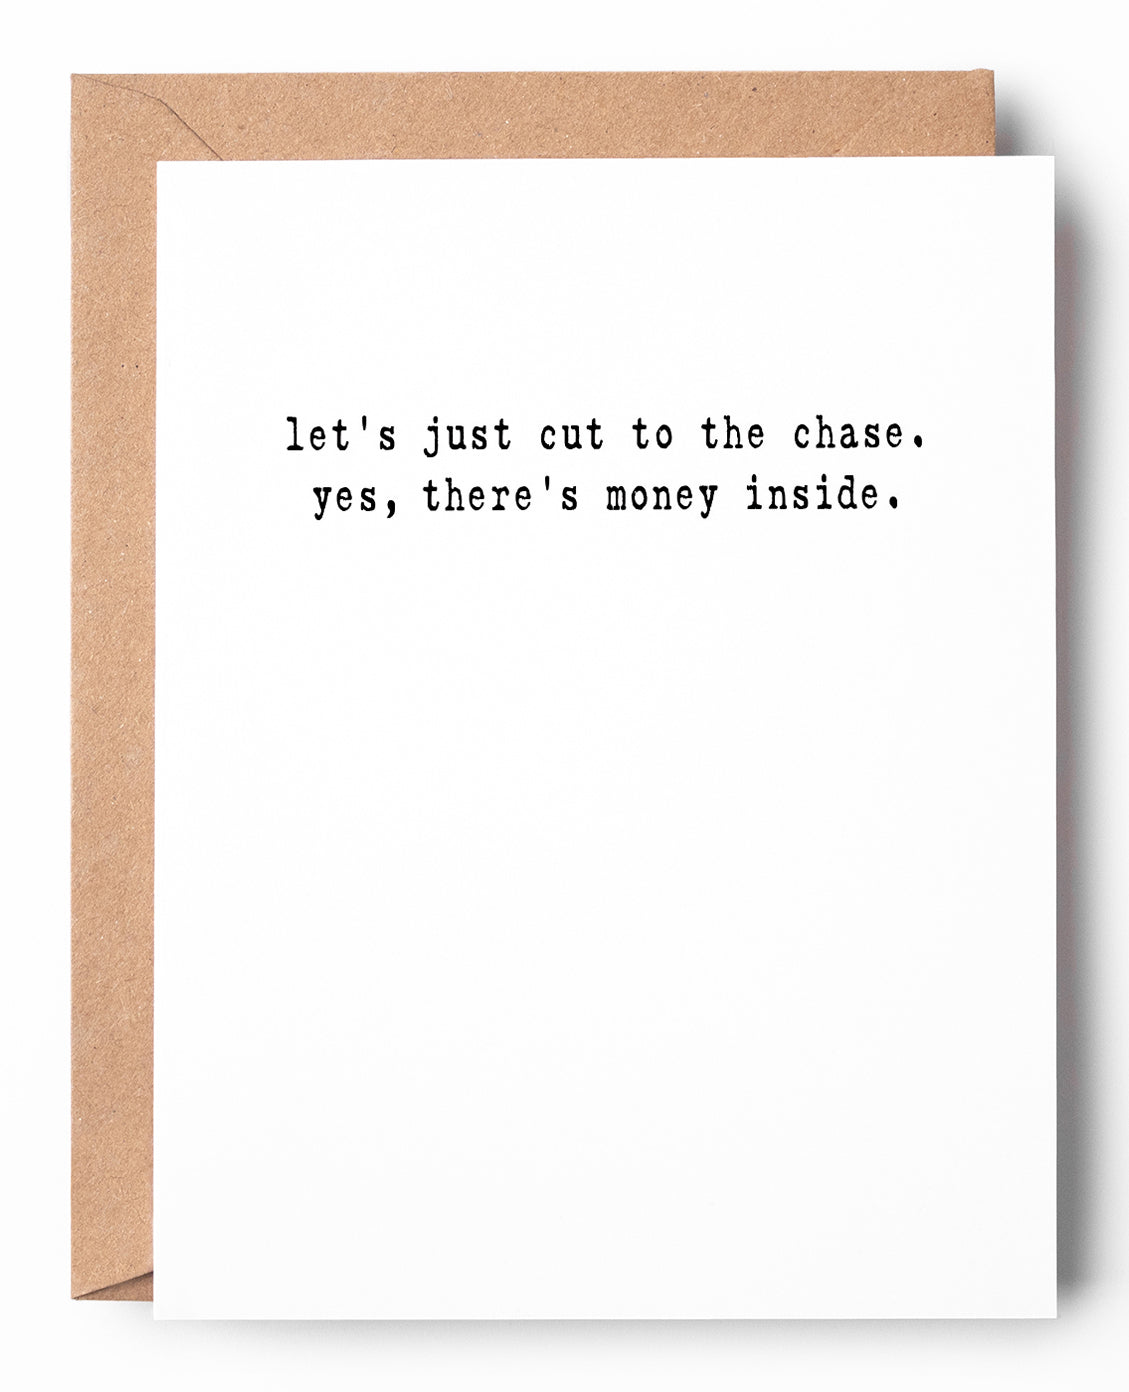 Funny letterpress money holder card says: Let's just cut to the chase. Yes, there's money inside.